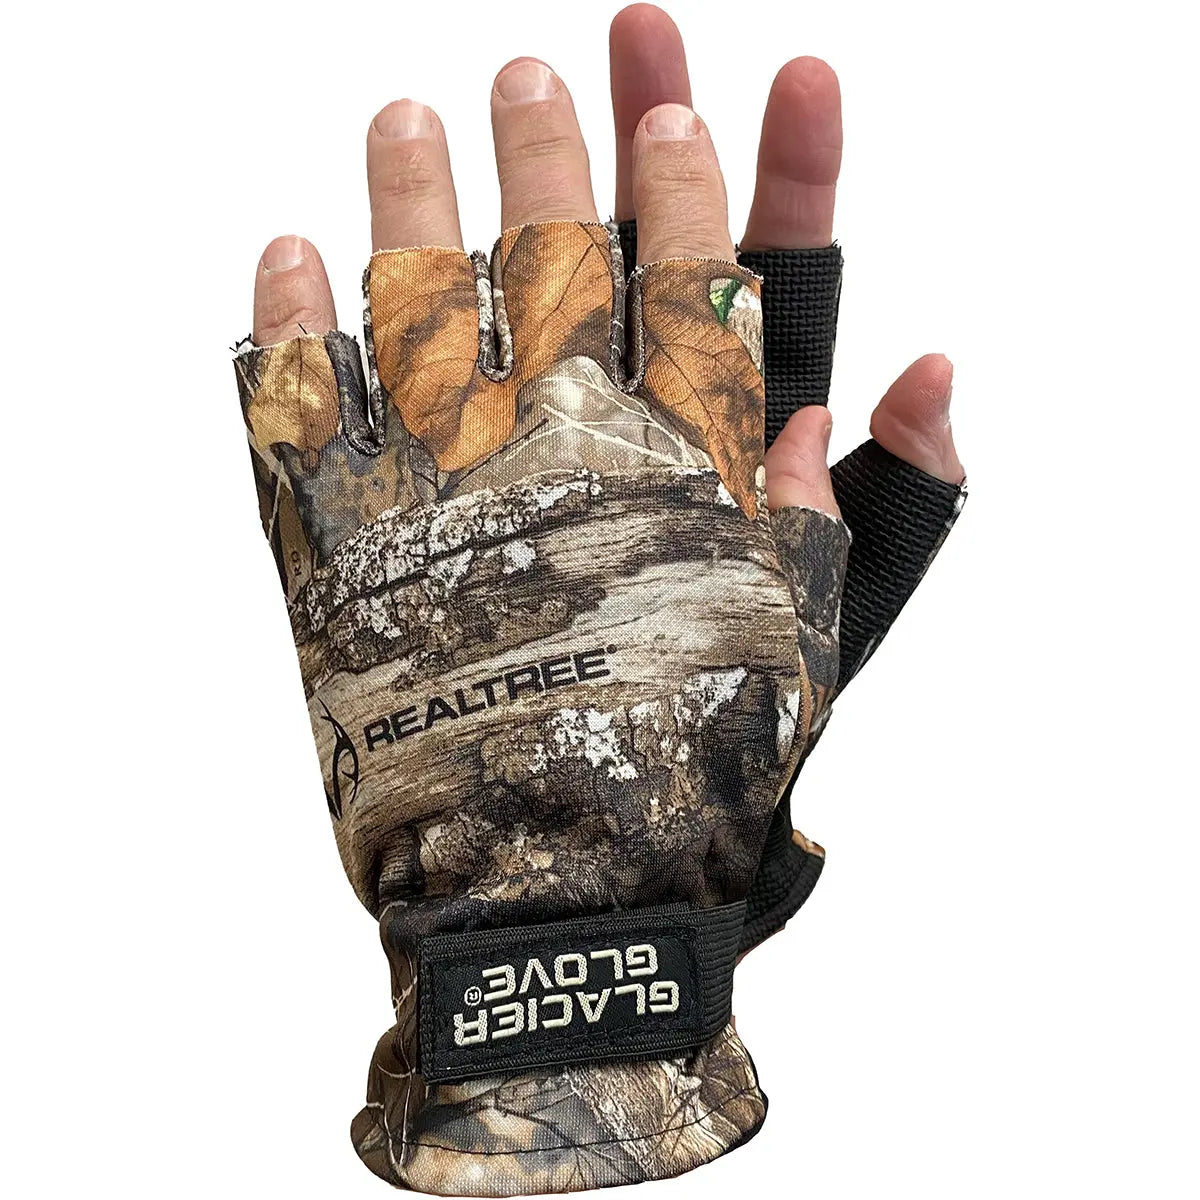 Glacier Glove Midweight Pro Hunter Fingerless Gloves - Large - Realtree Camo